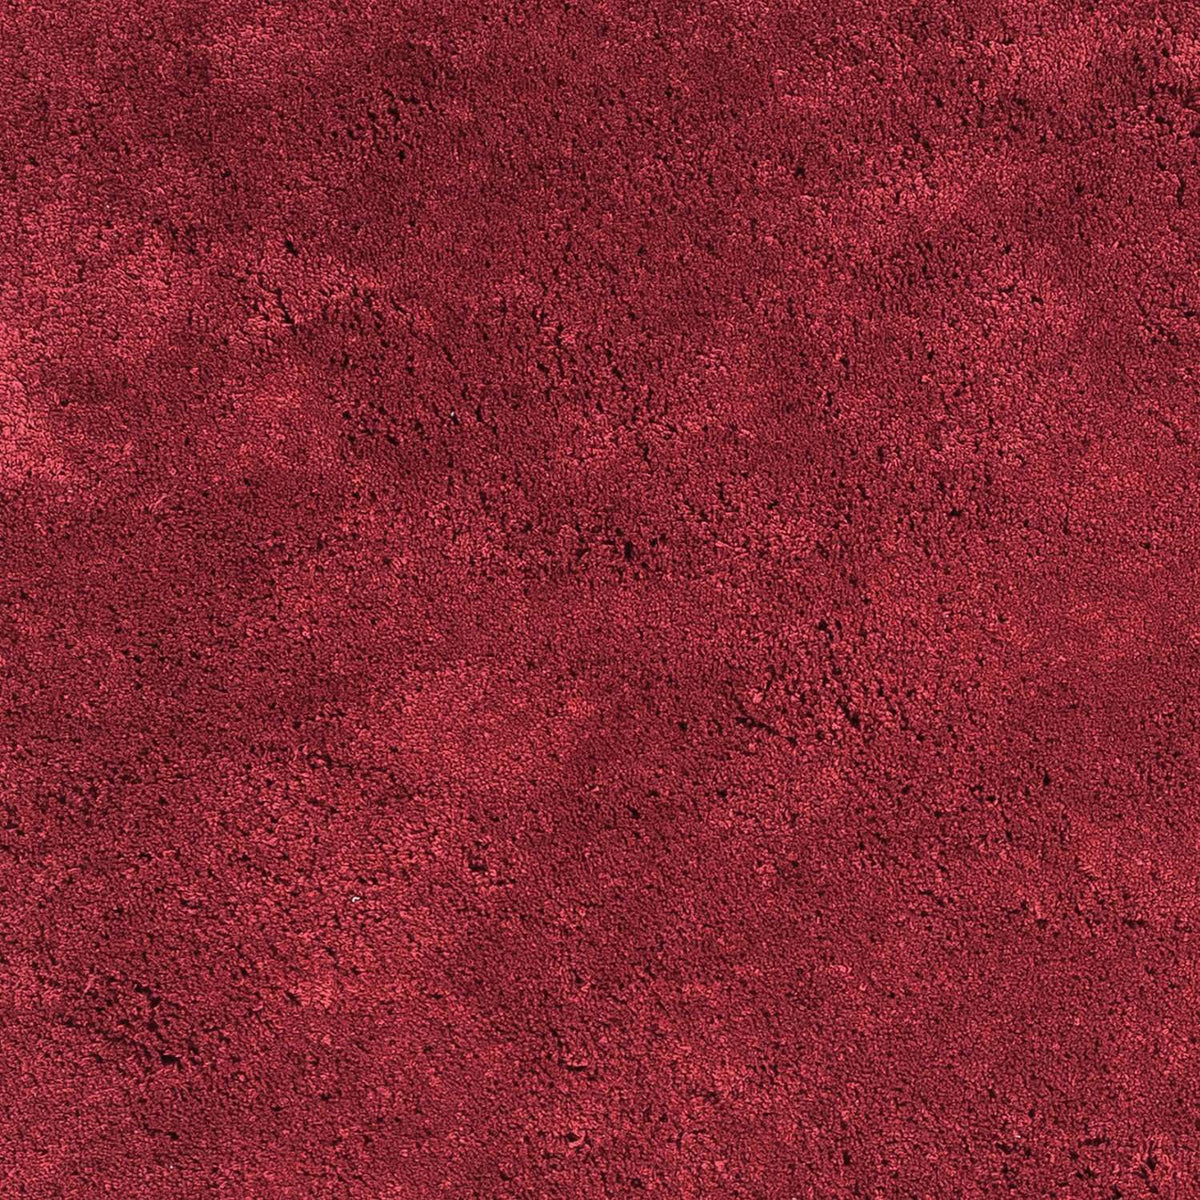 Bliss 1564 Shag Red Rug - Rug & Home